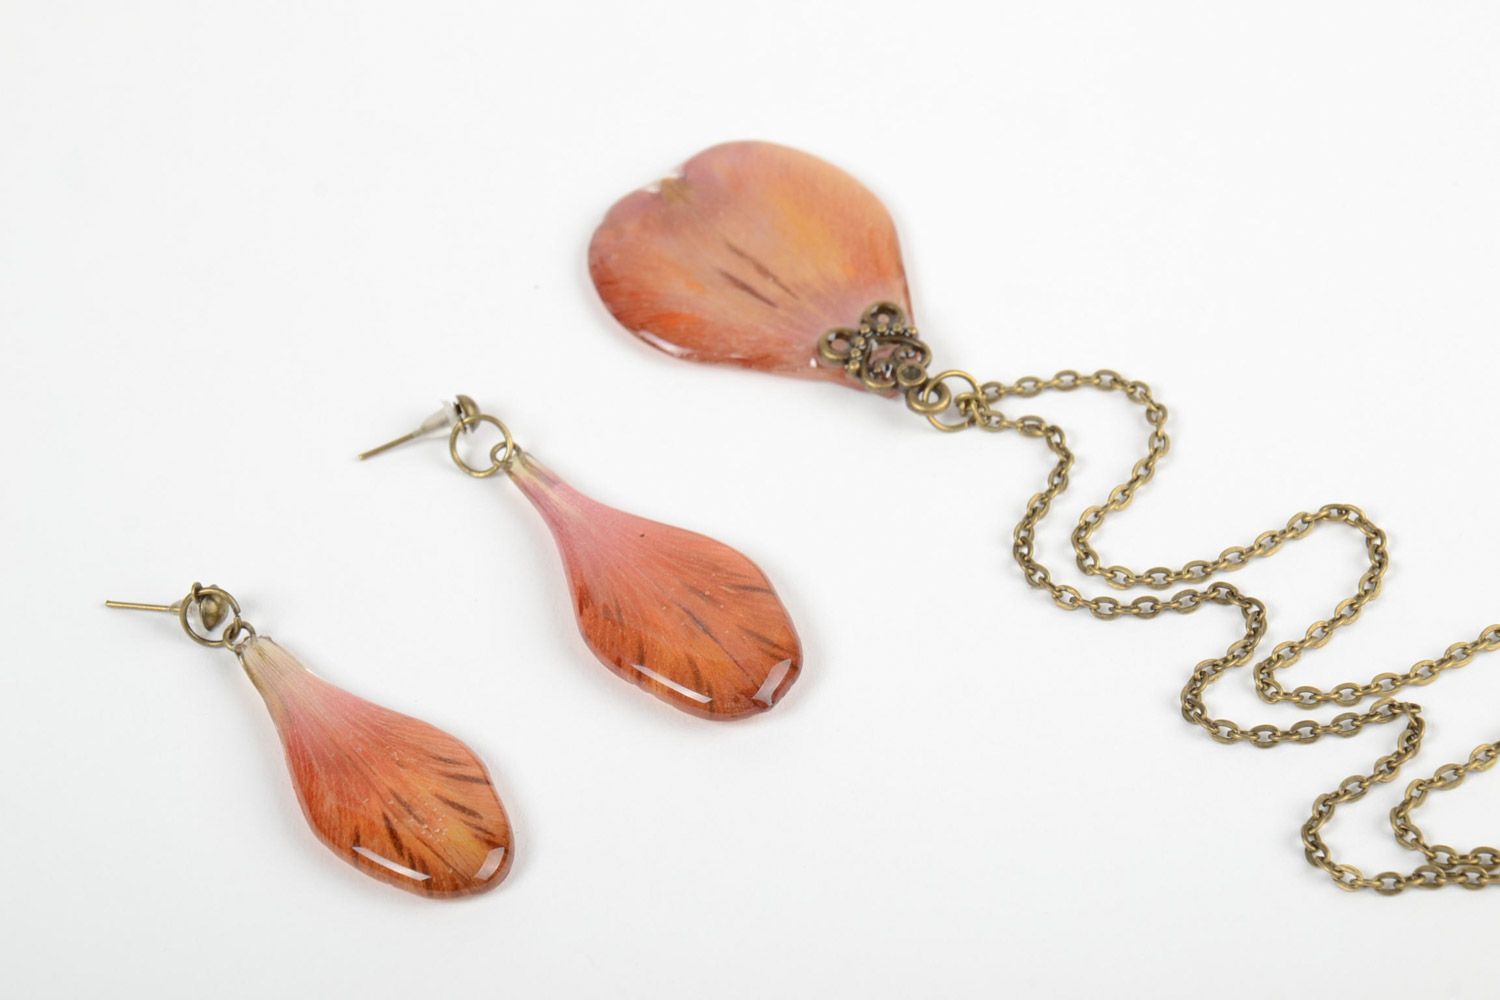 Handmade jewelry set with real flowers coated with epoxy 2 items botanical earrings and pendant photo 5